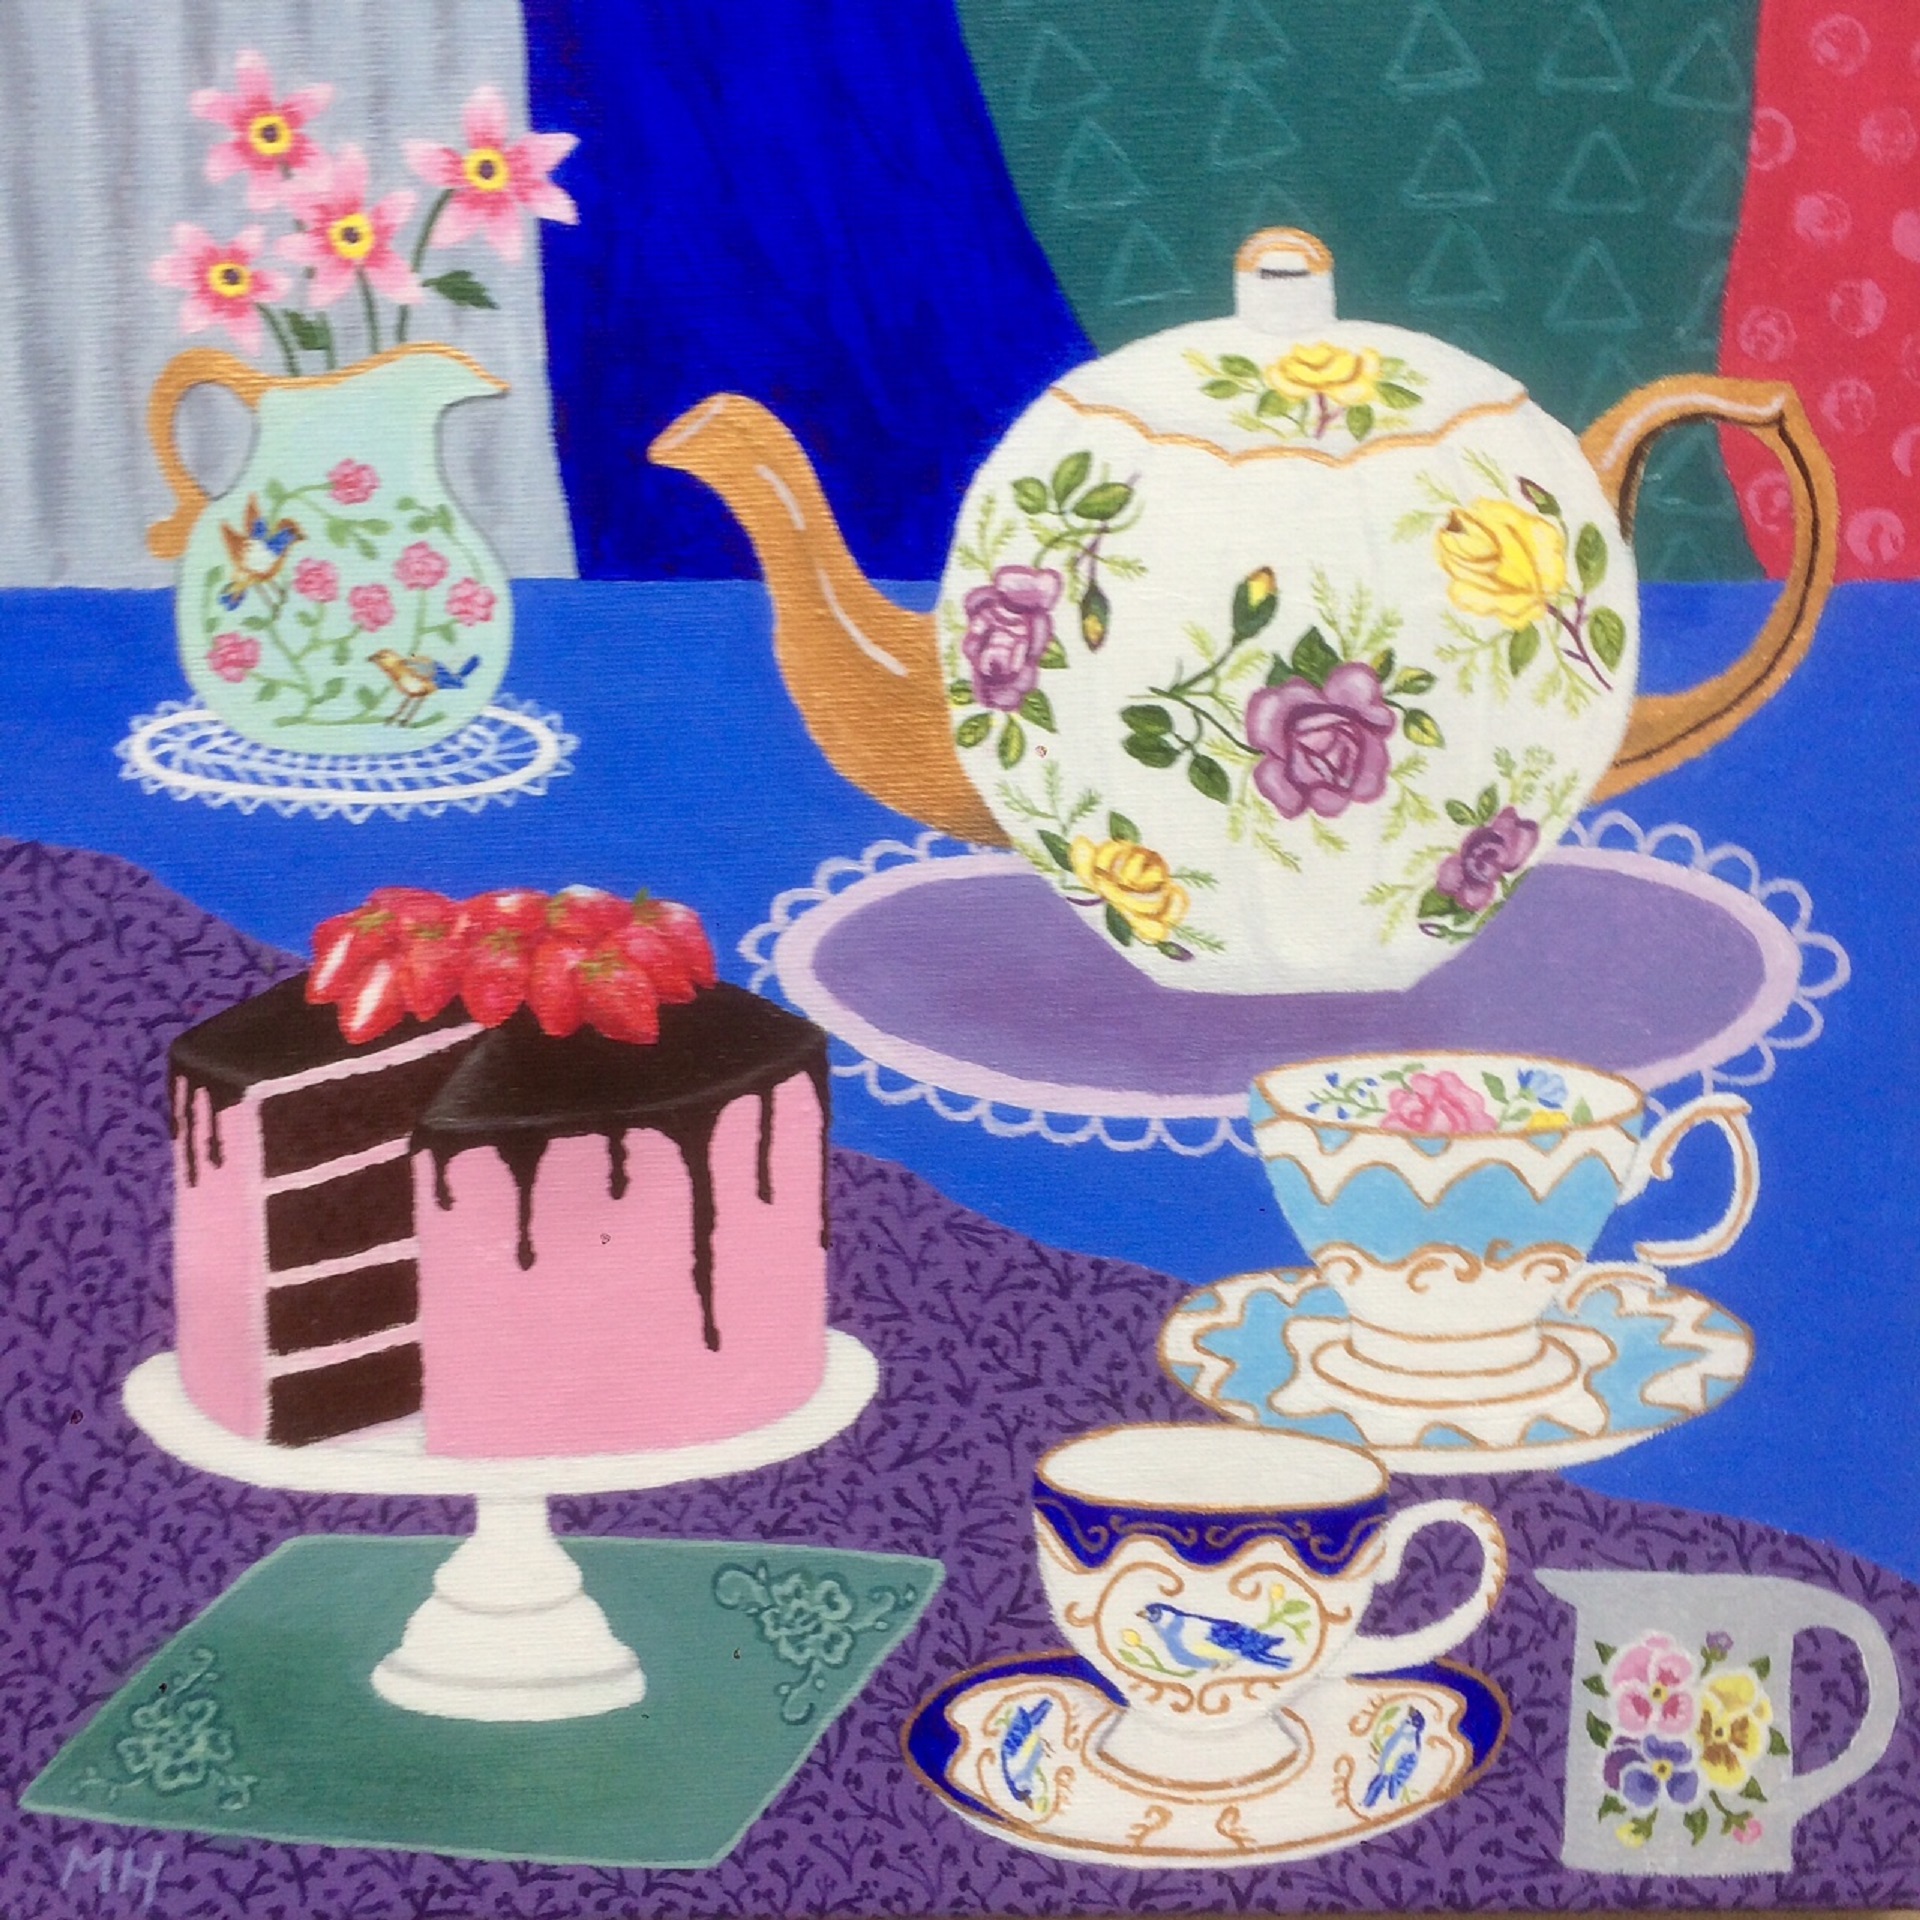 Painting of a table set for tea